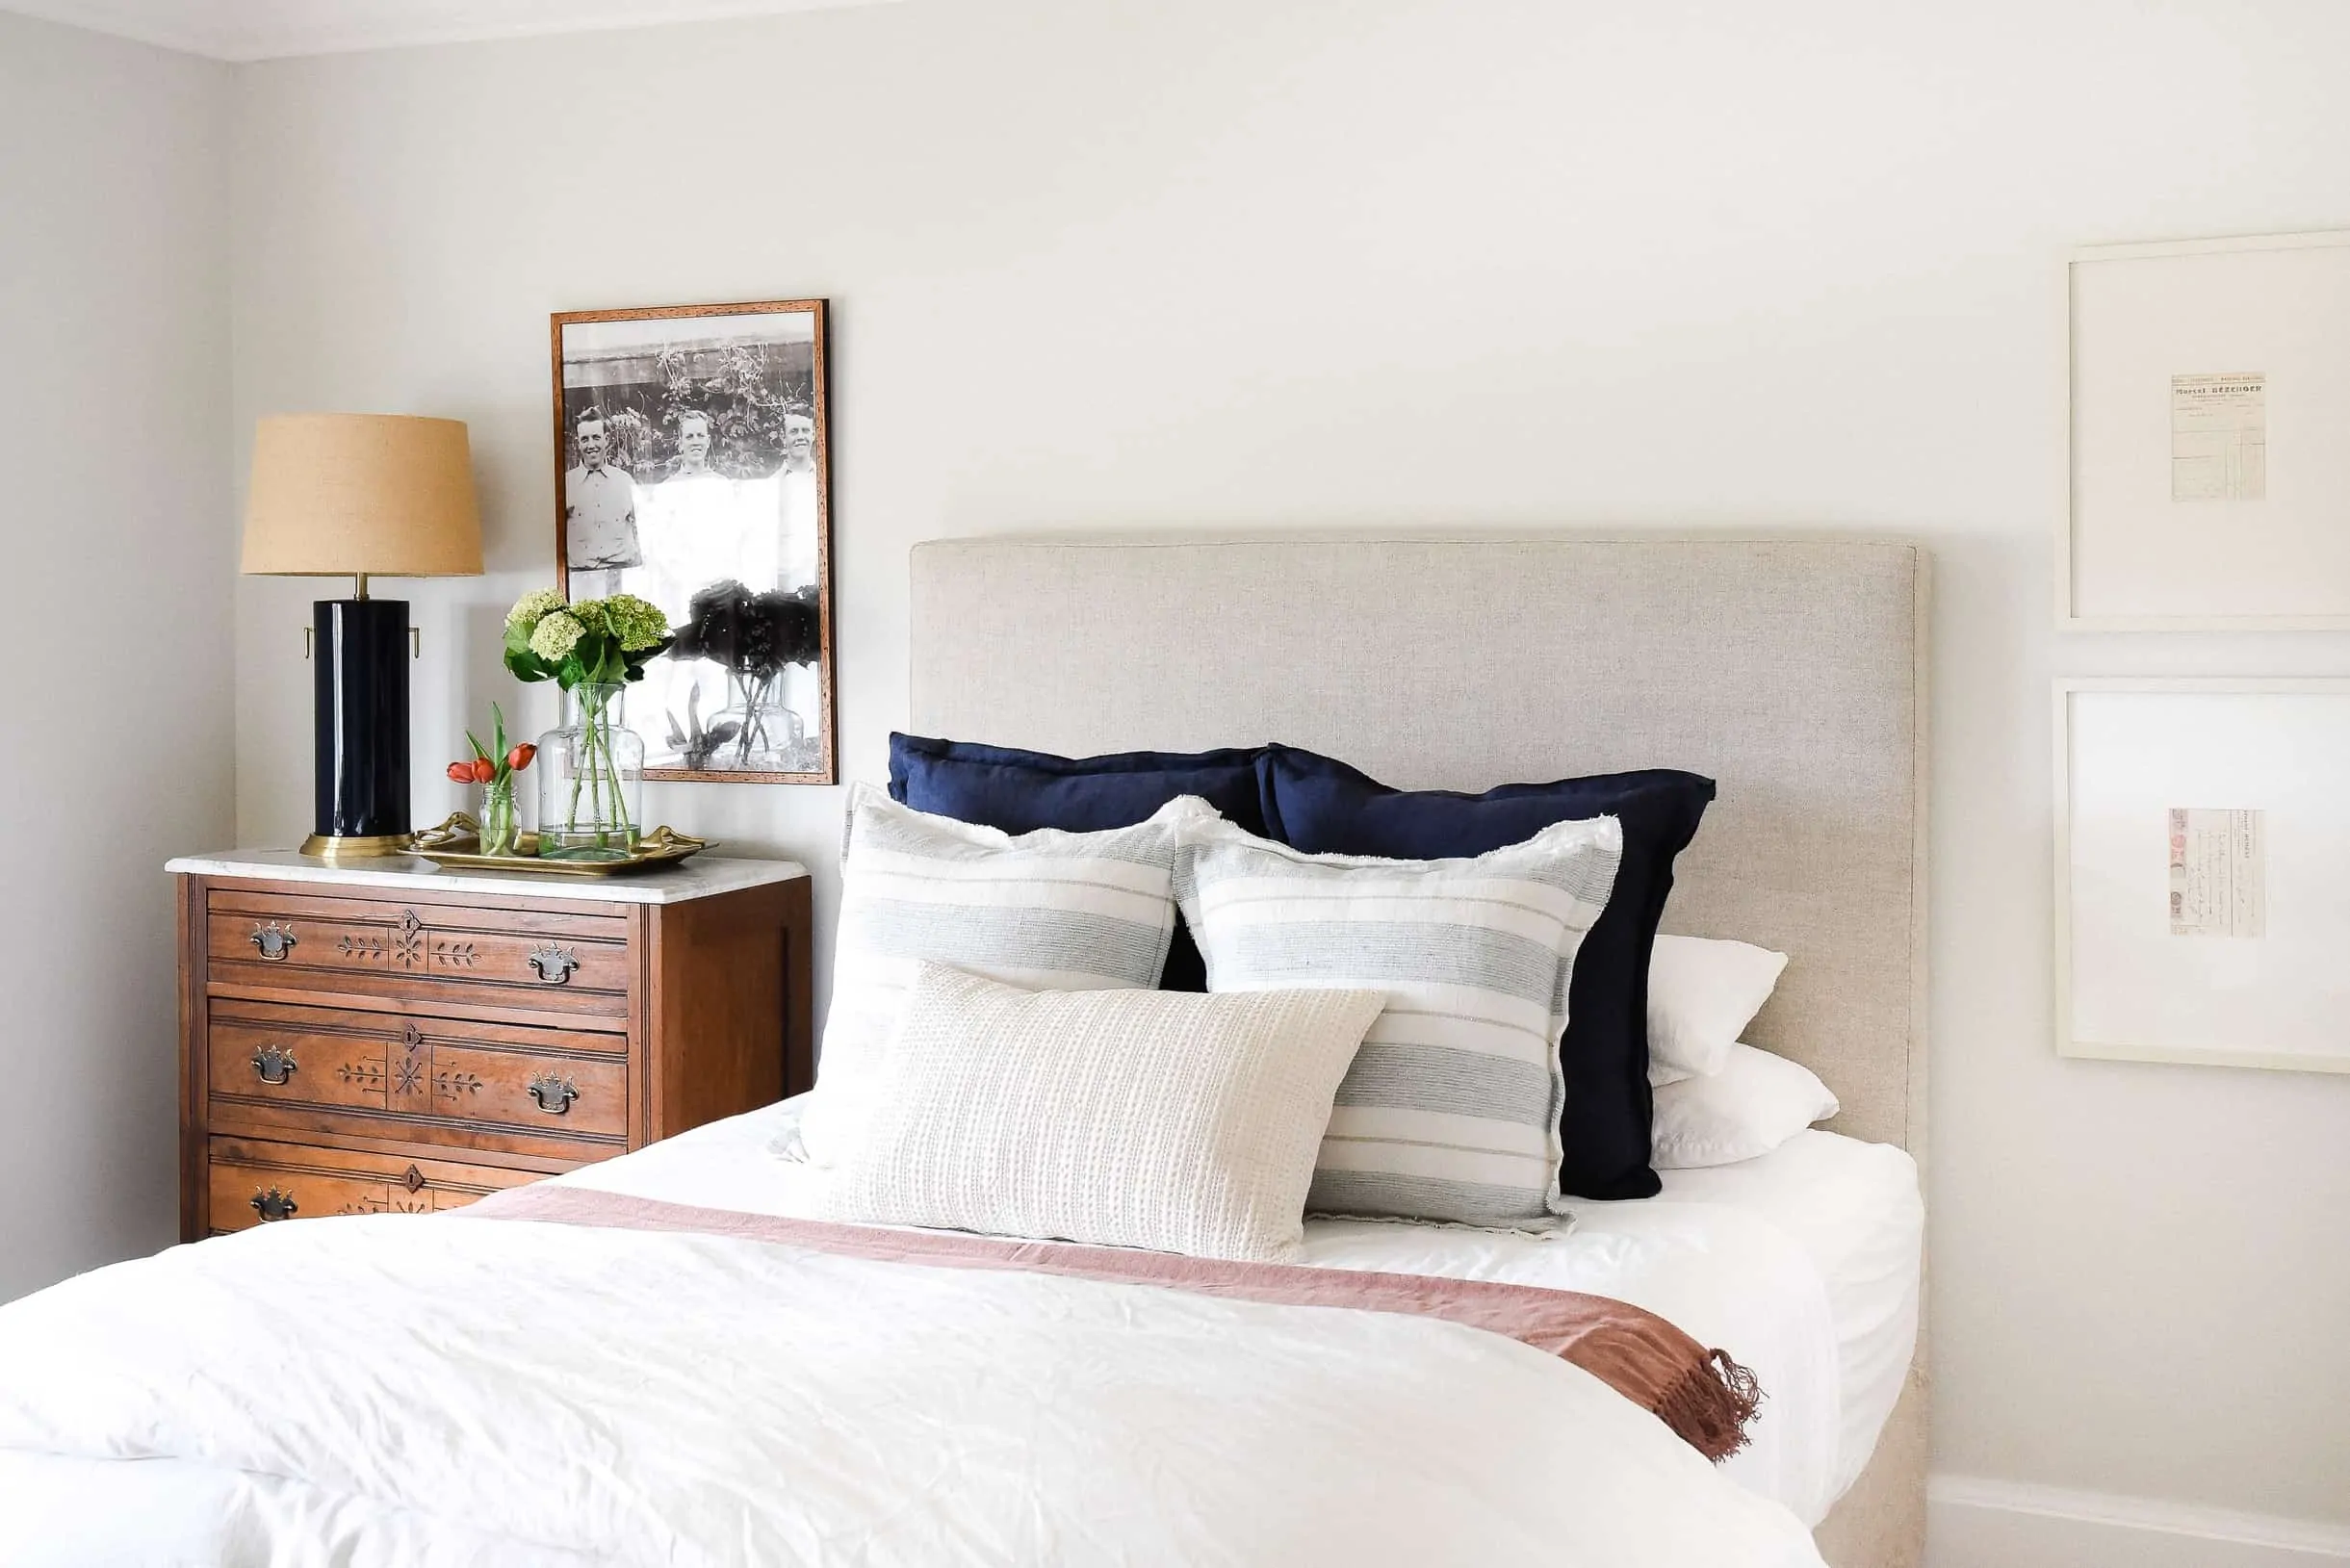 Farmhouse Bedroom Design | Tour our Guest Bedroom - Boxwood Ave.